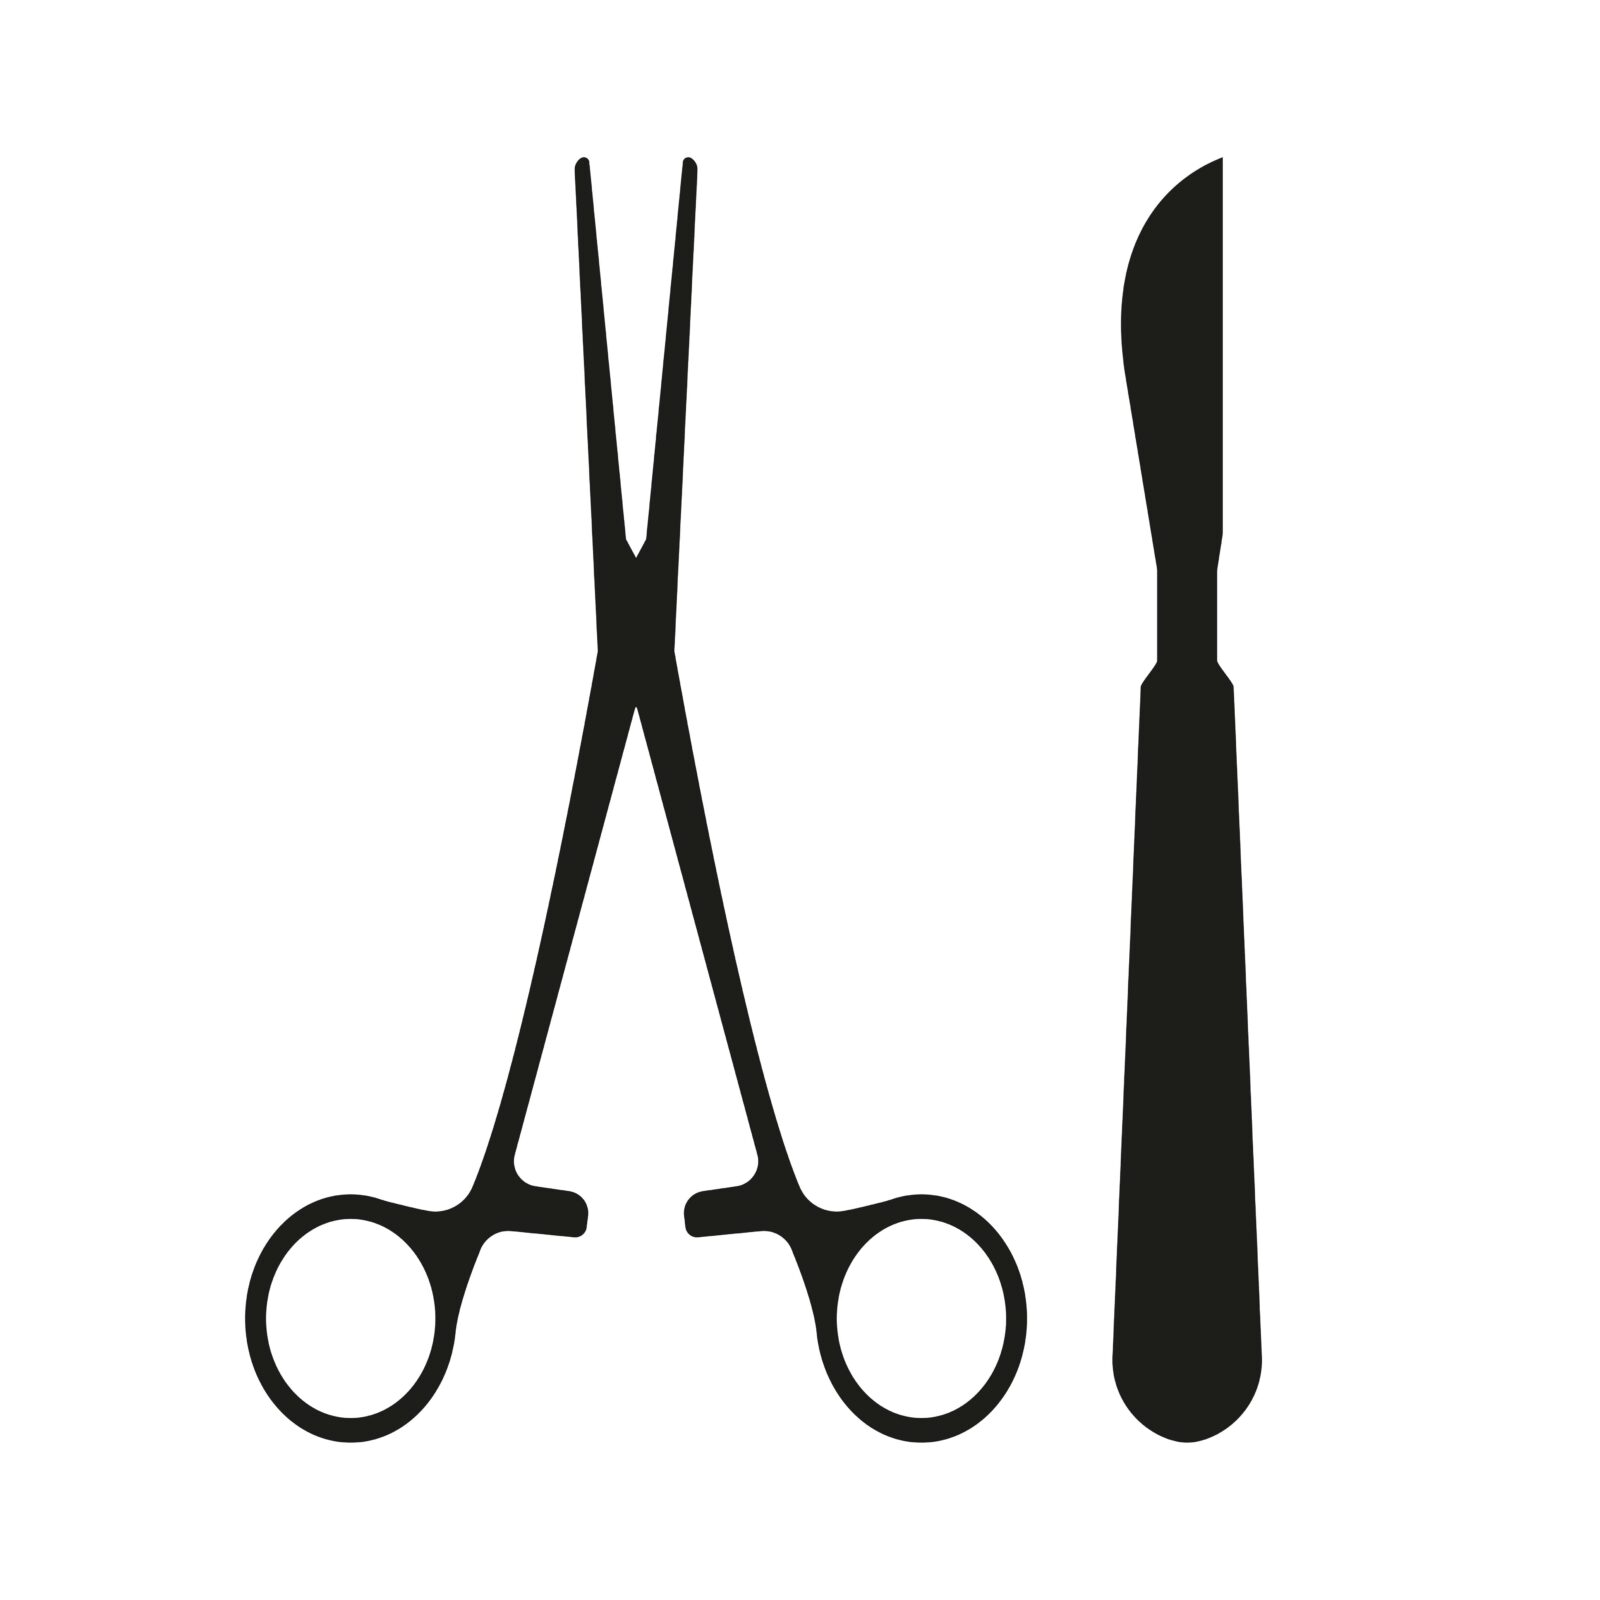 Surgical Instrument. Medical scalpel and clamp icon isolated on white background. Vector illustration.